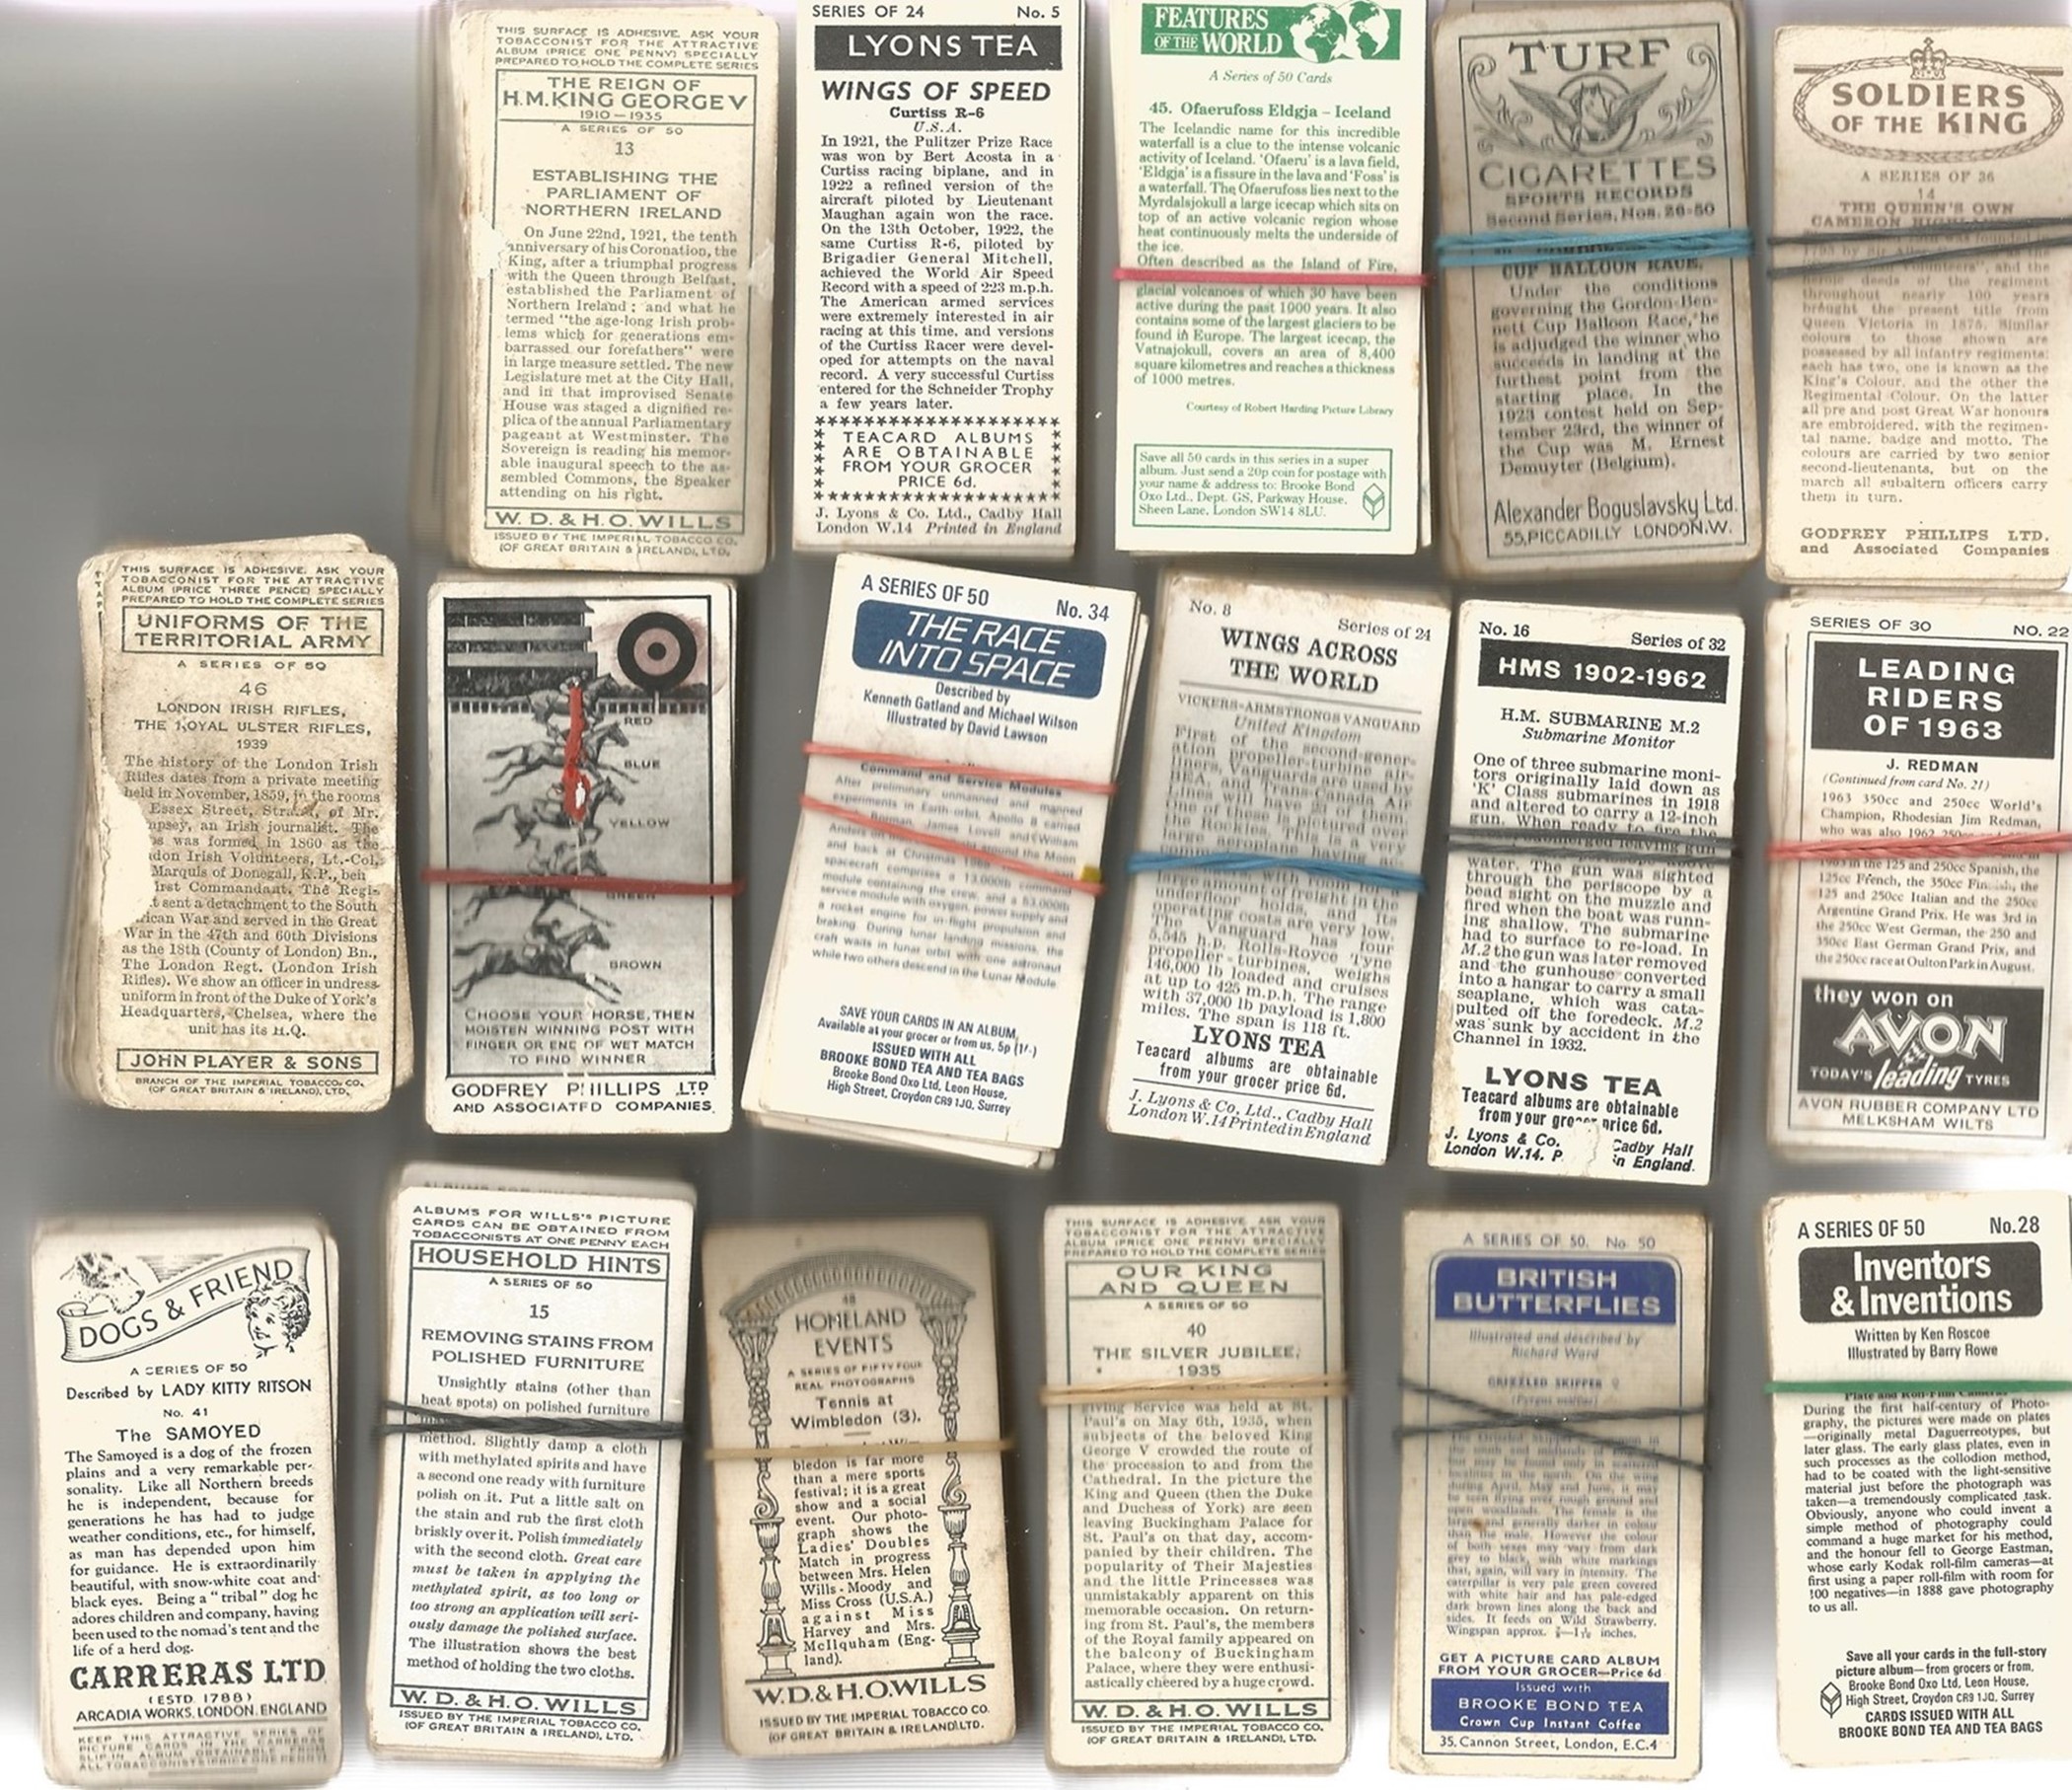 Collectors Cards / Cigarette Cards approx 500 550 loose cards (part sets) including Soldiers of - Image 2 of 2